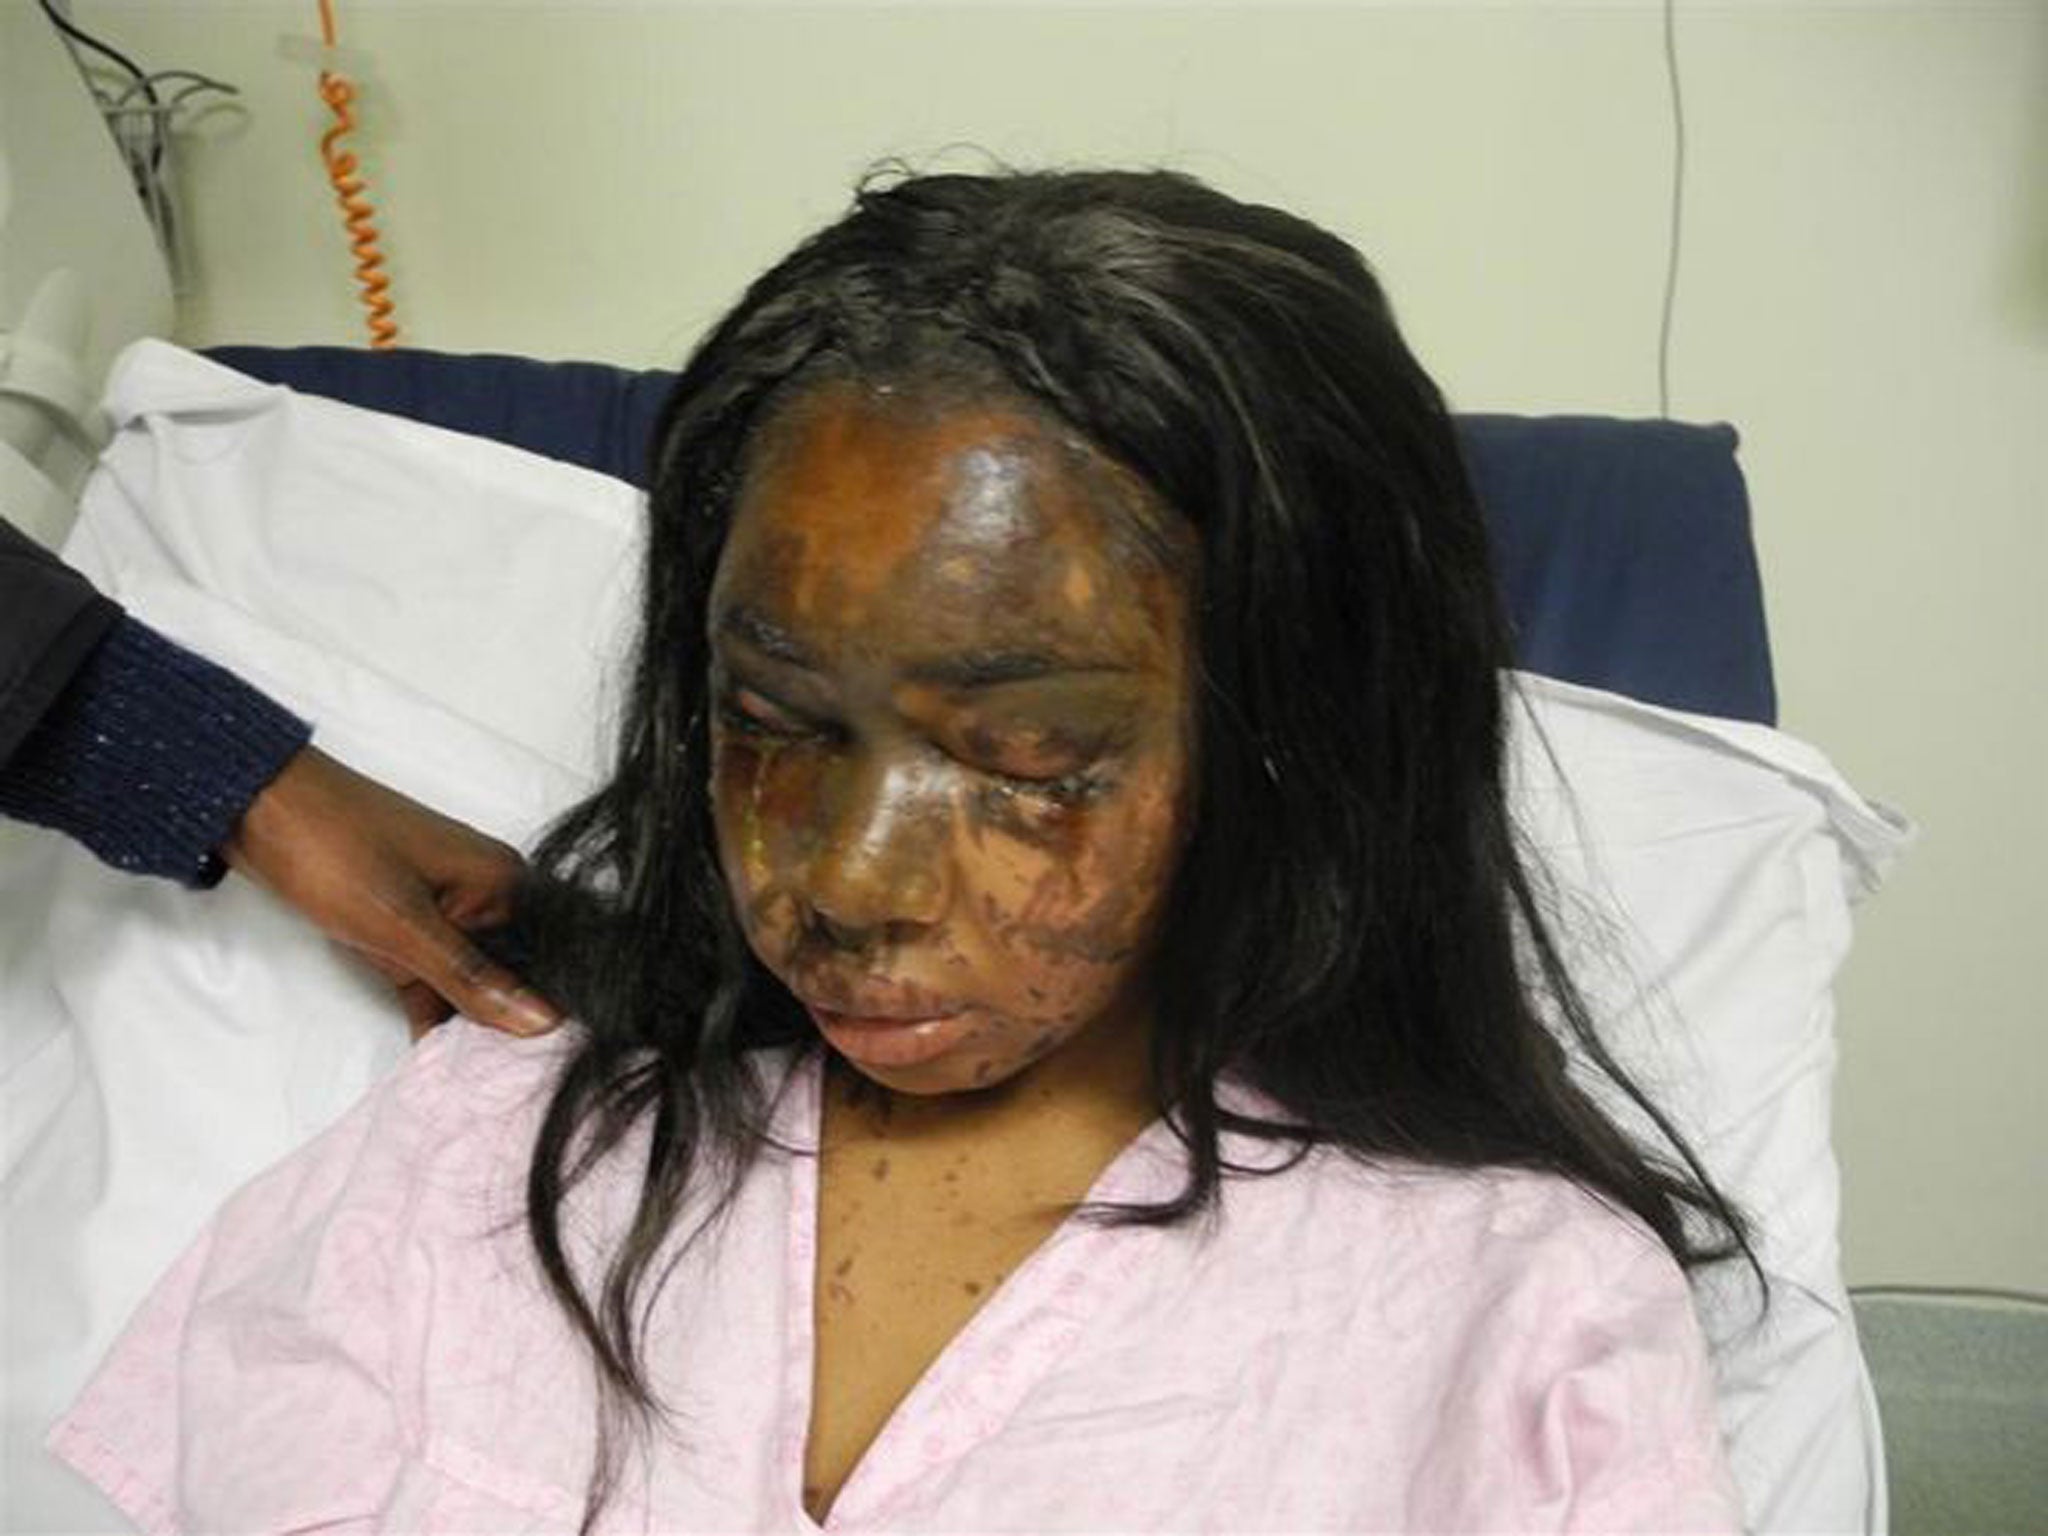 Naomi Oni was on her way home from work when acid was thrown in her face